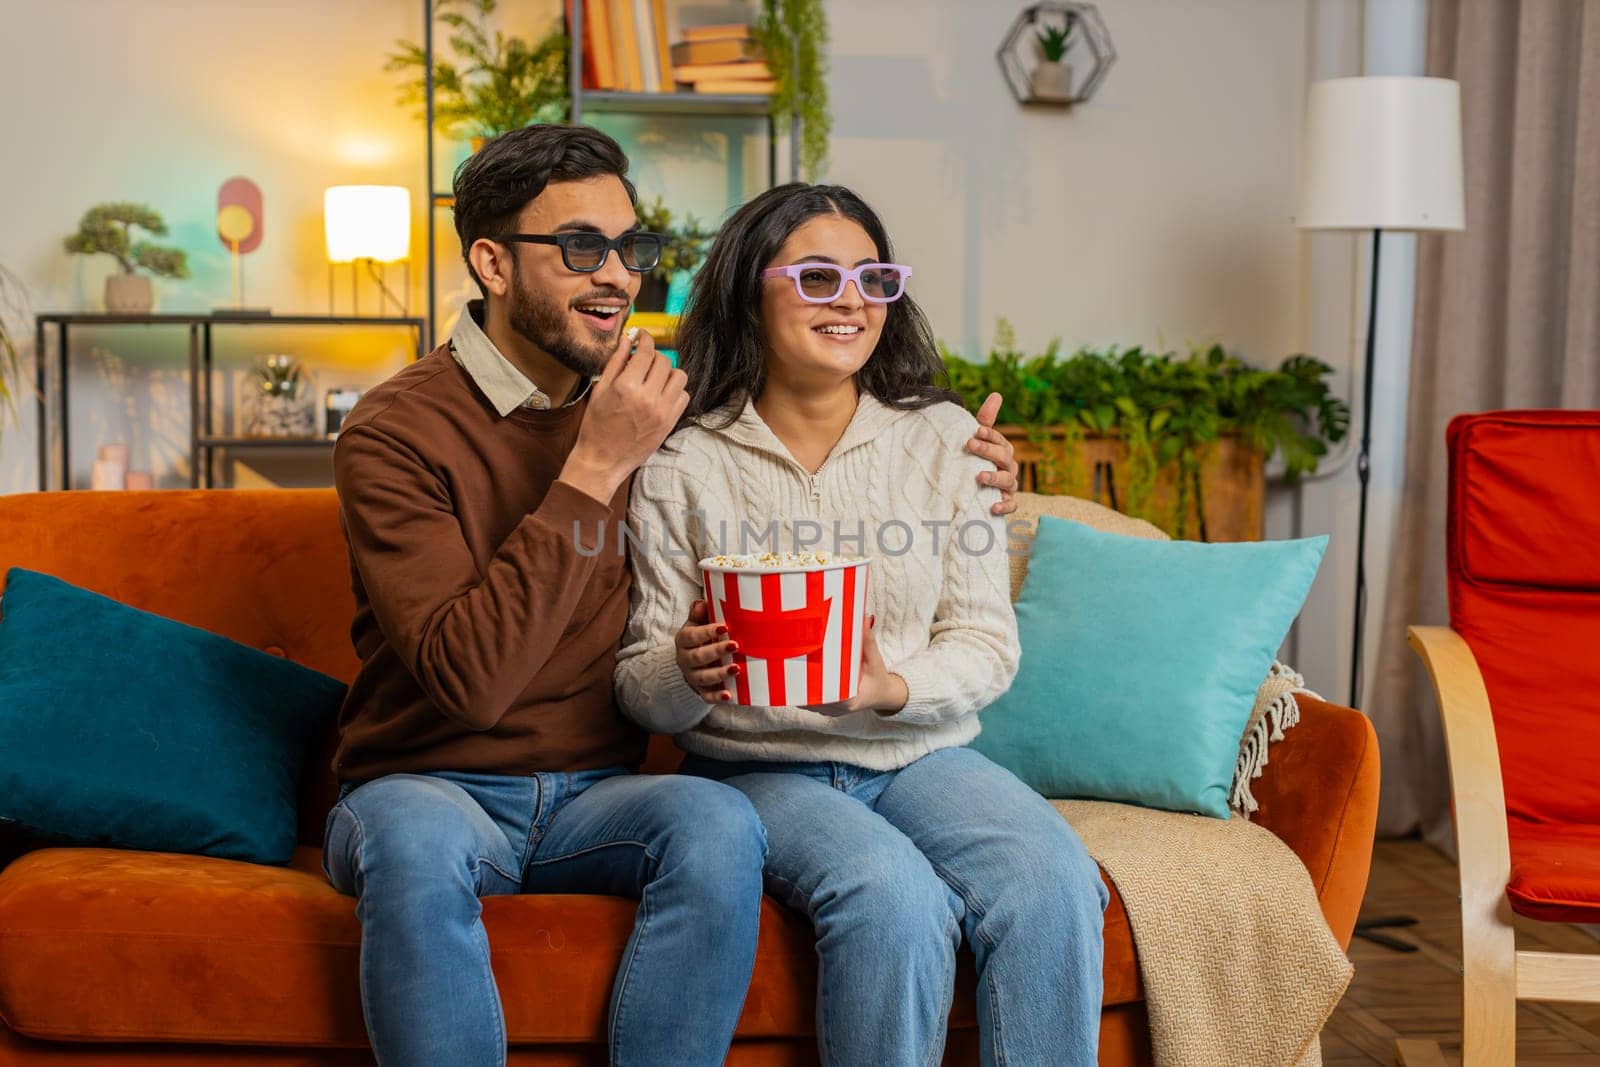 Cheerful young Arabian couple in 3D glasses eating popcorn and watching comedy movie sitting on sofa in living room at home. Smiling diverse family laughing enjoying film during weekend in apartment.